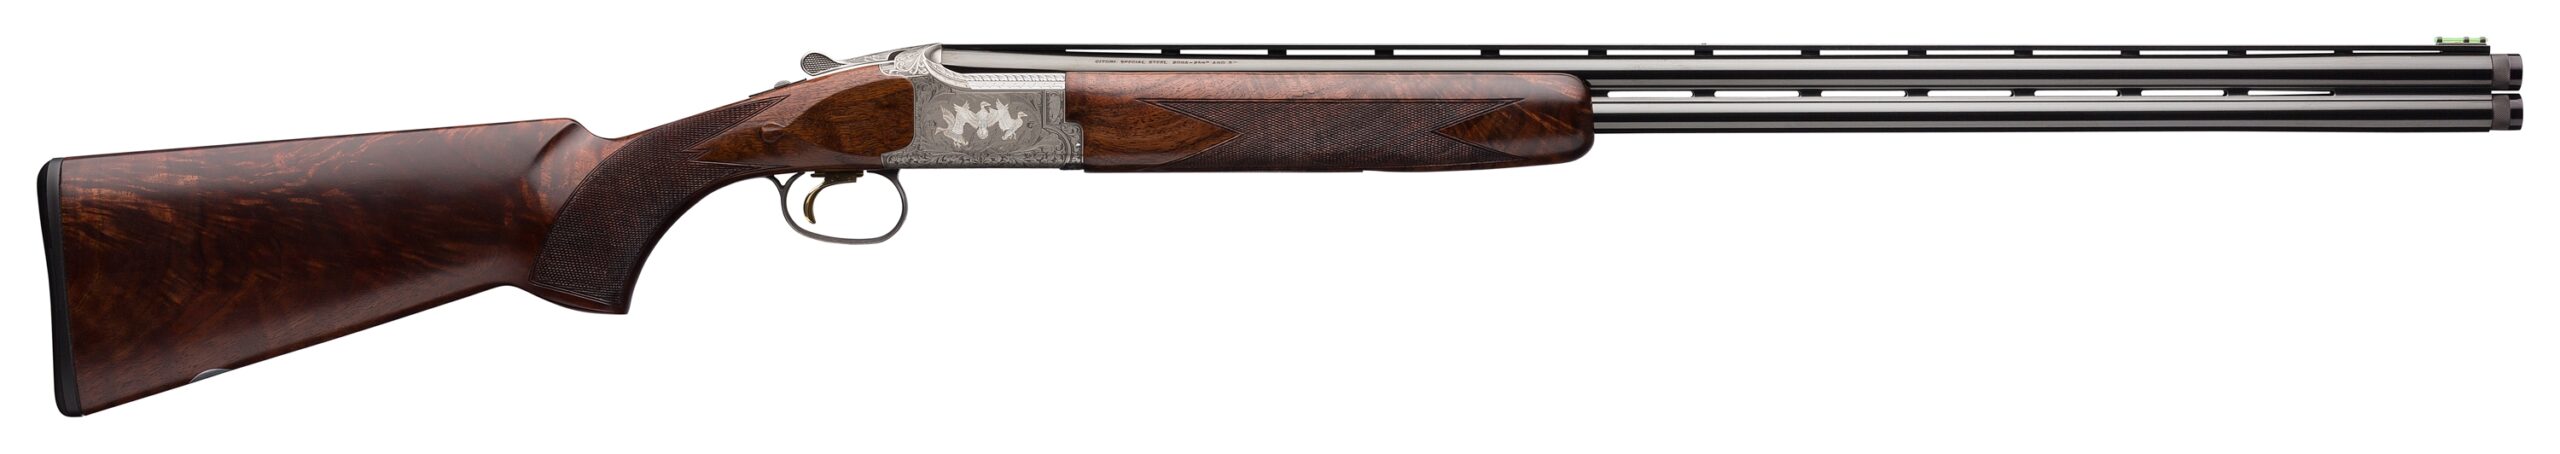 Browning's Citori can be purchased in many different models.